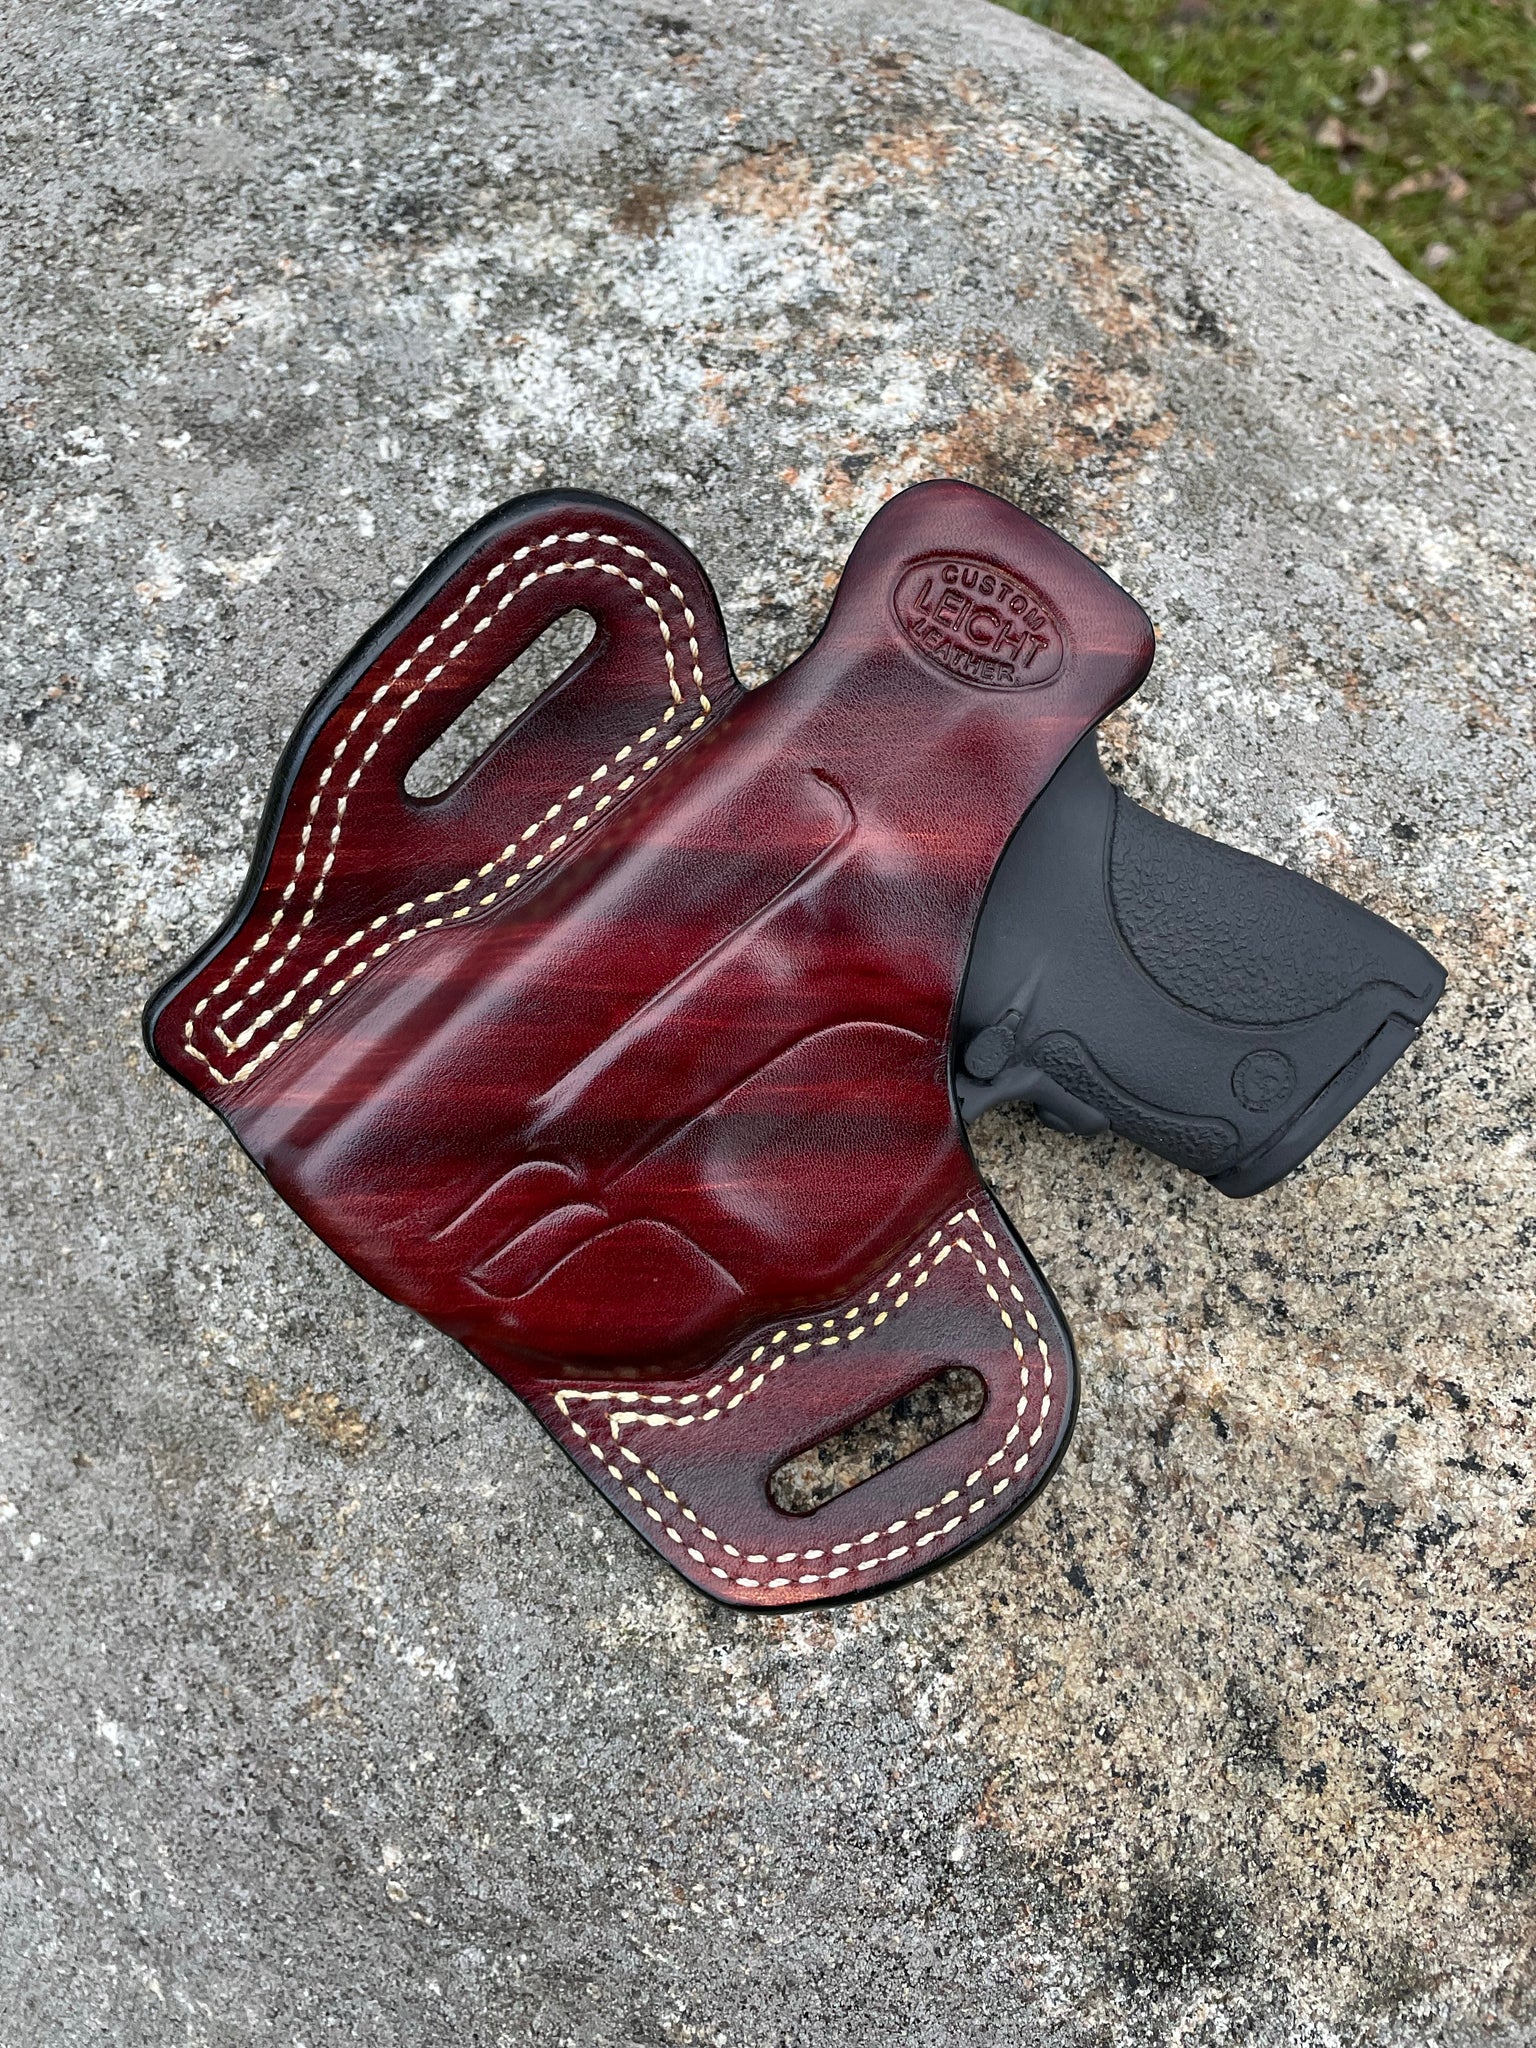 M&P Shield with Crimson trace OWB Holster